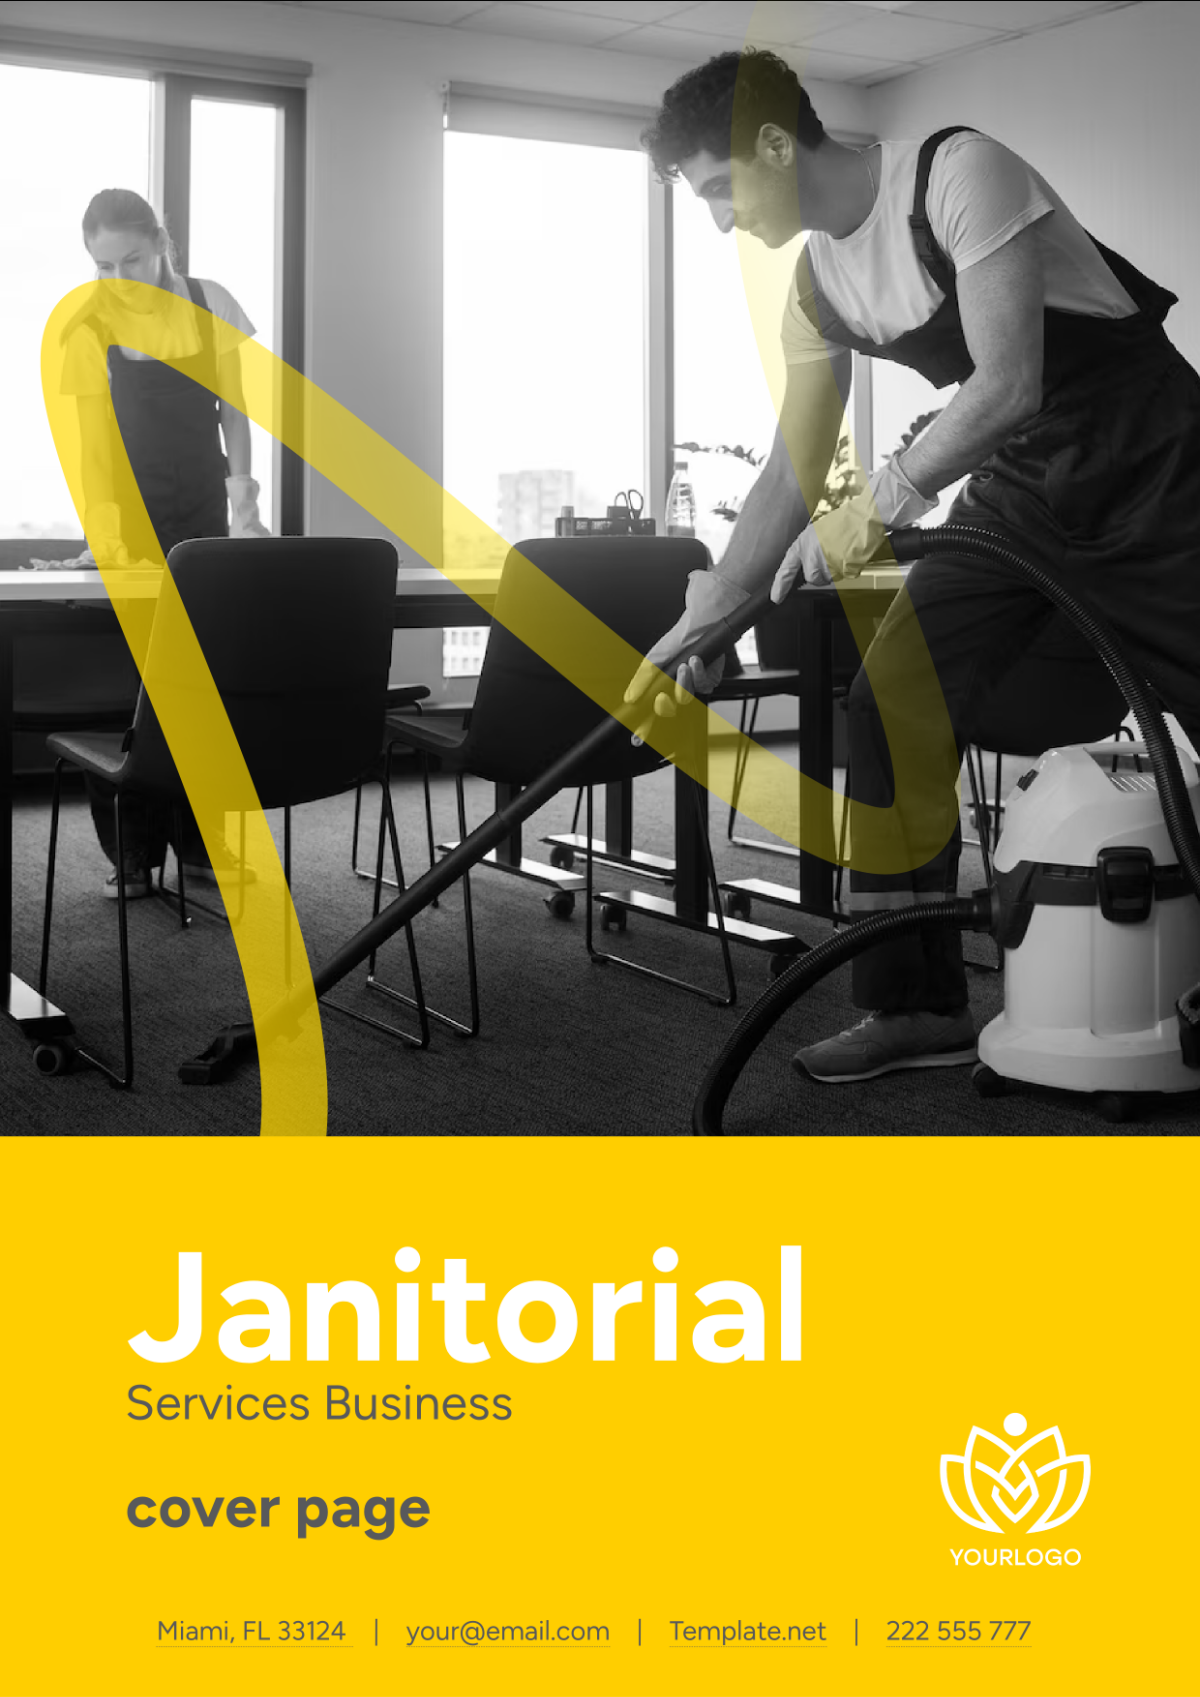 Janitorial Services Business Cover Page Template